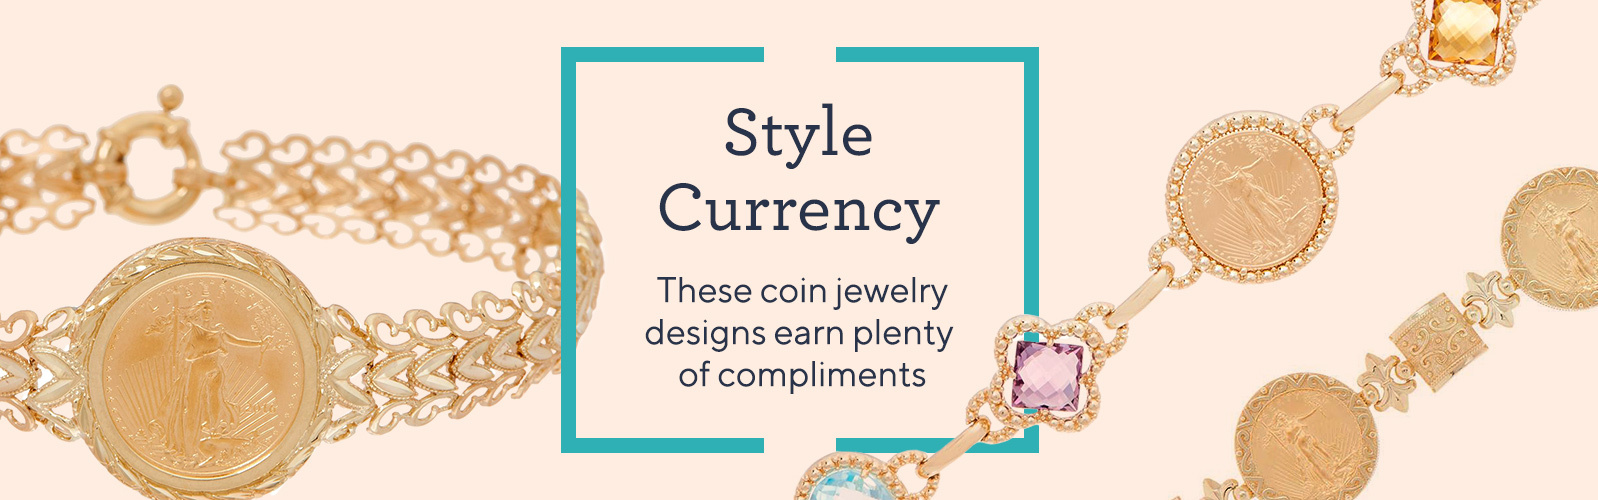 Style Currency   These coin jewelry designs earn plenty of compliments